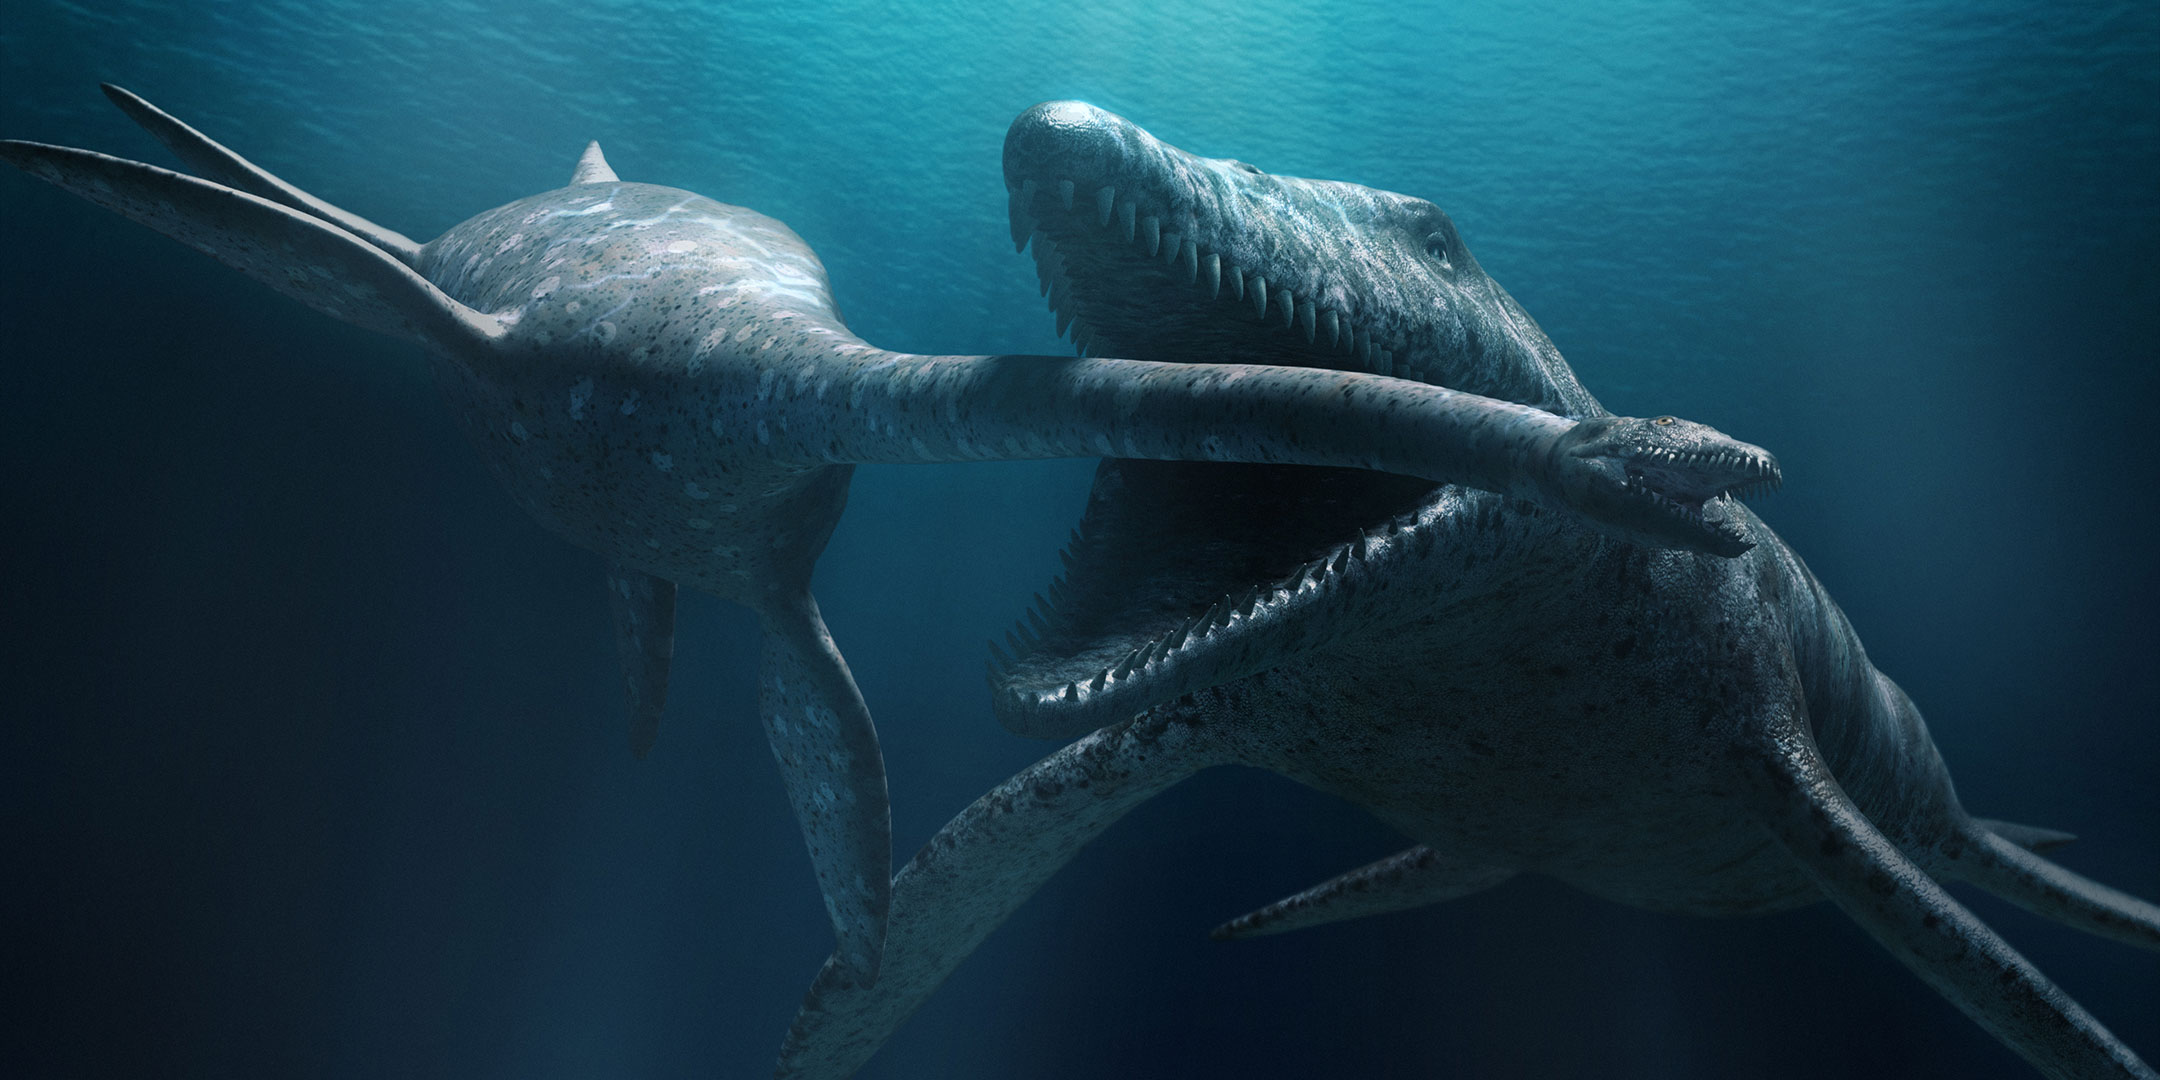 SEA MONSTERS 3D: A PREHISTORIC ADVENTURE WITH FLYING MONSTERS 3D